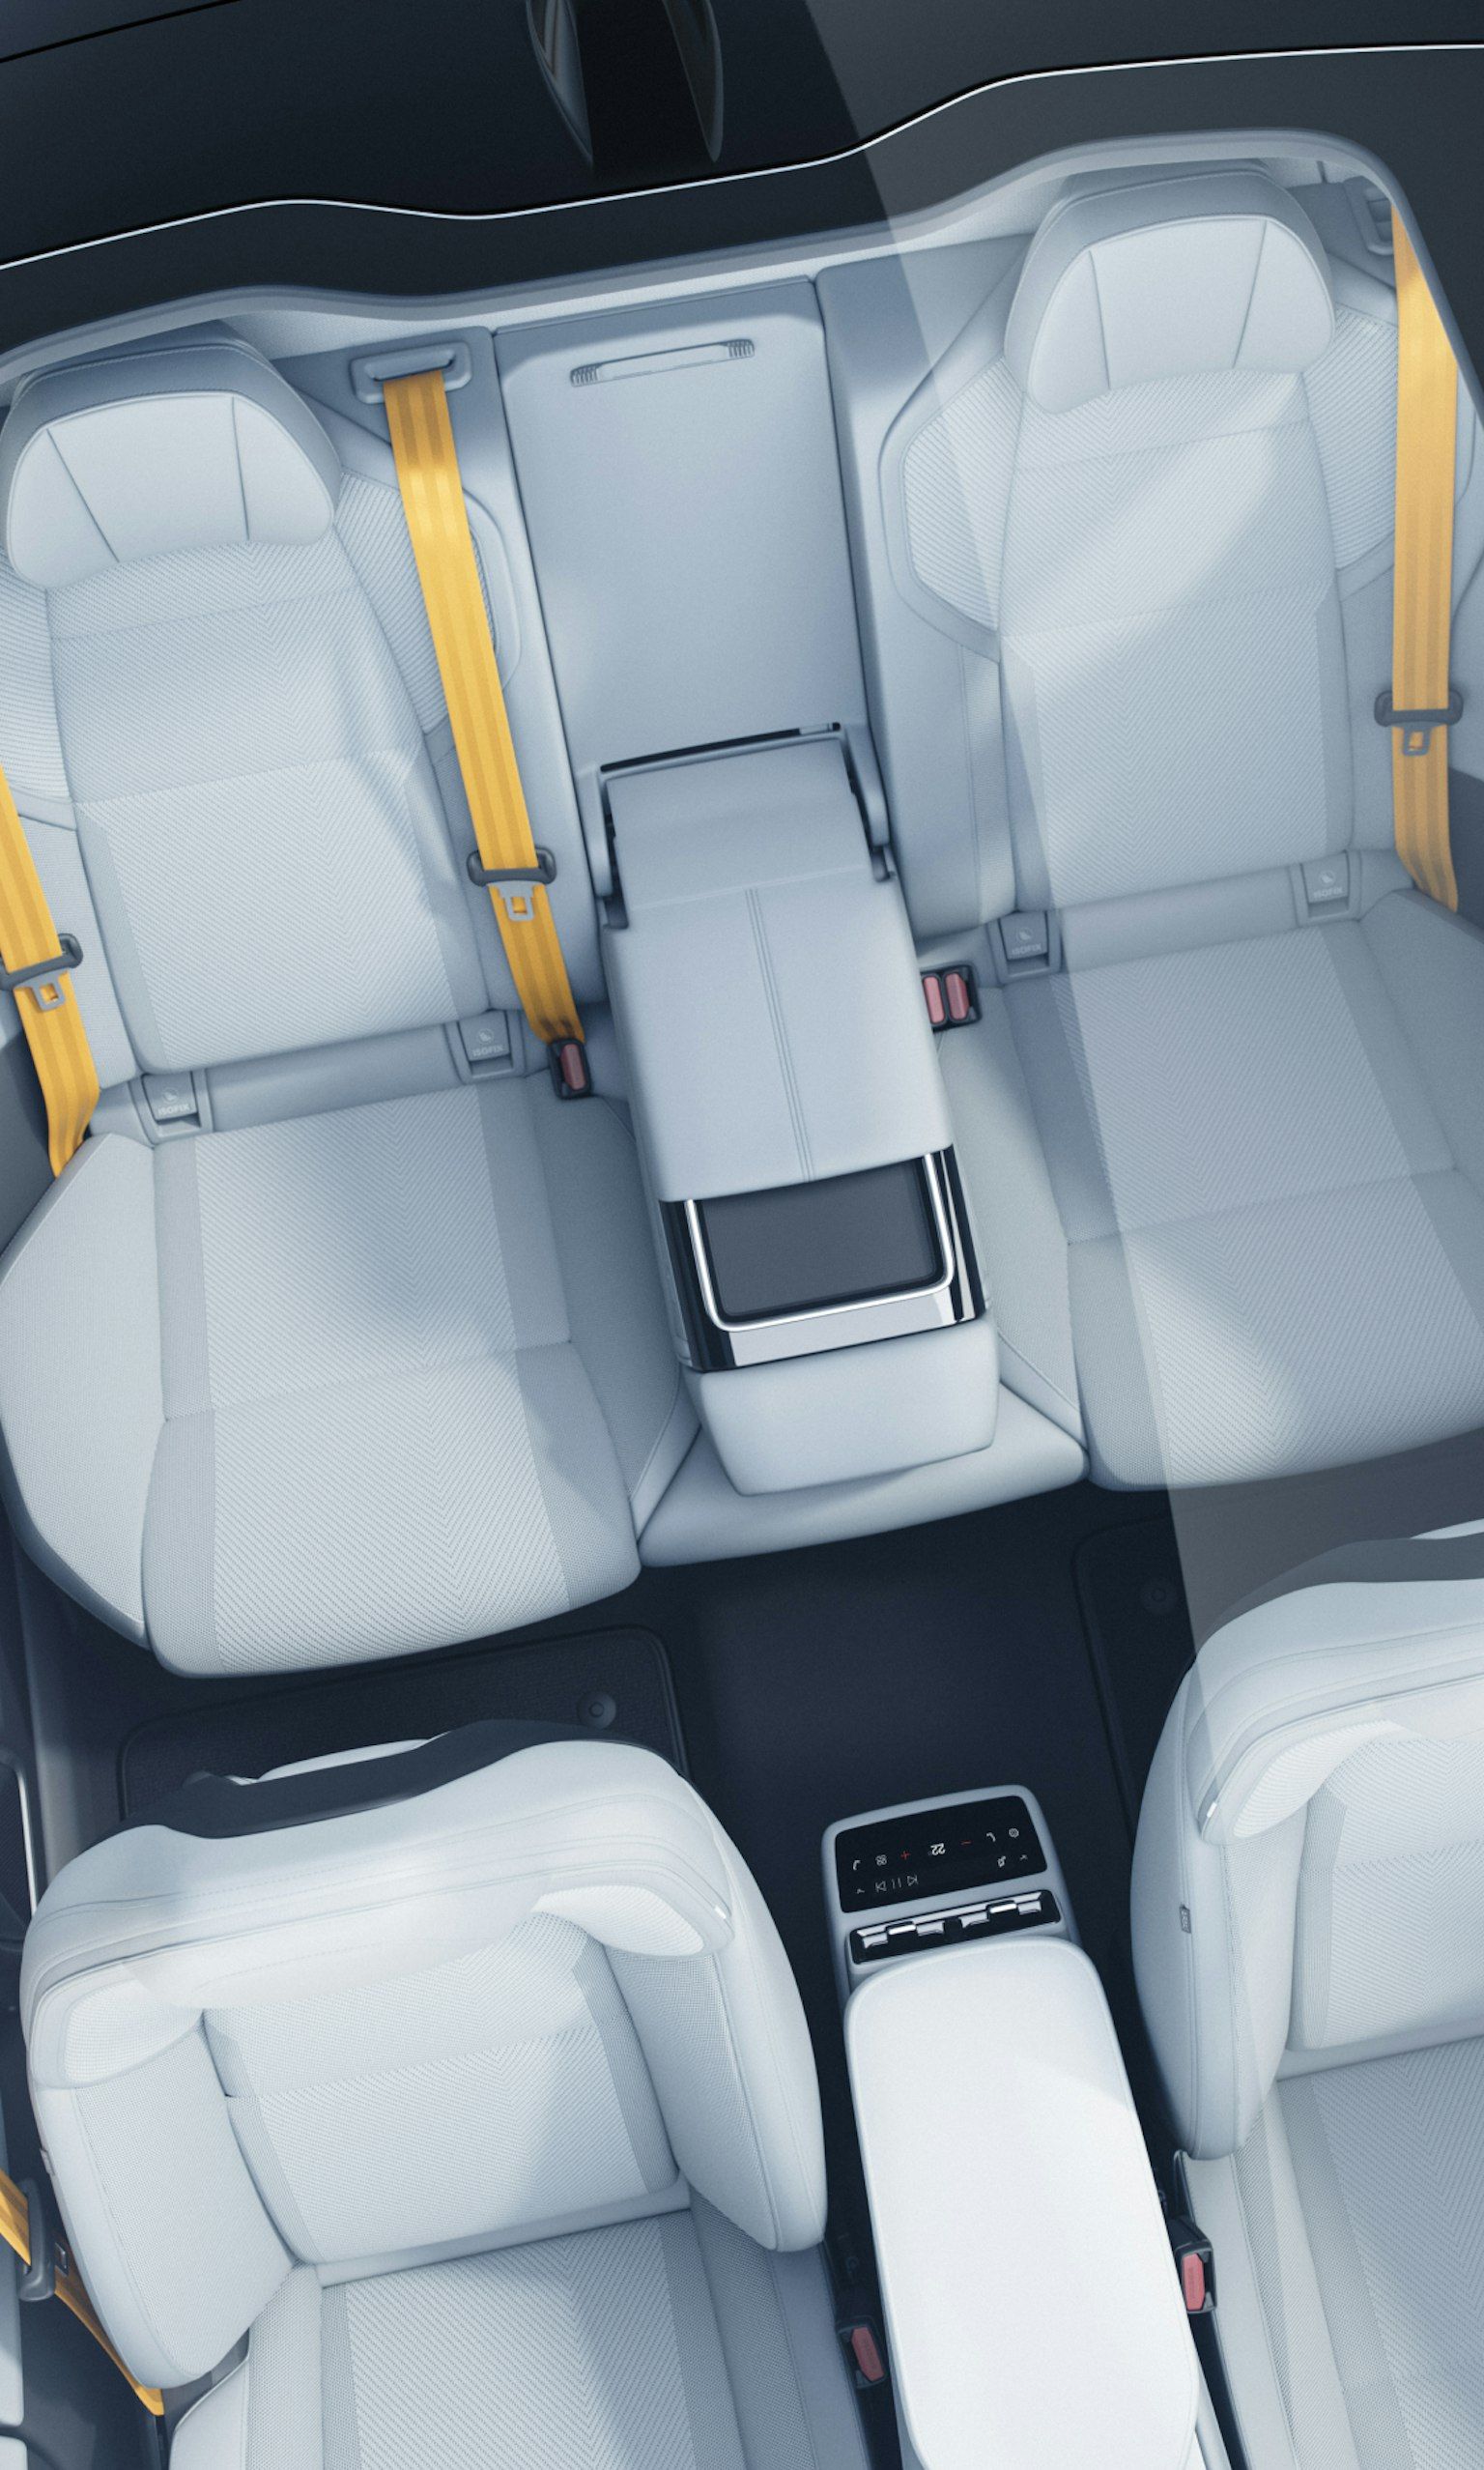 Polestar 4 interior with Tailored knit upholstery, showing all 5 seats